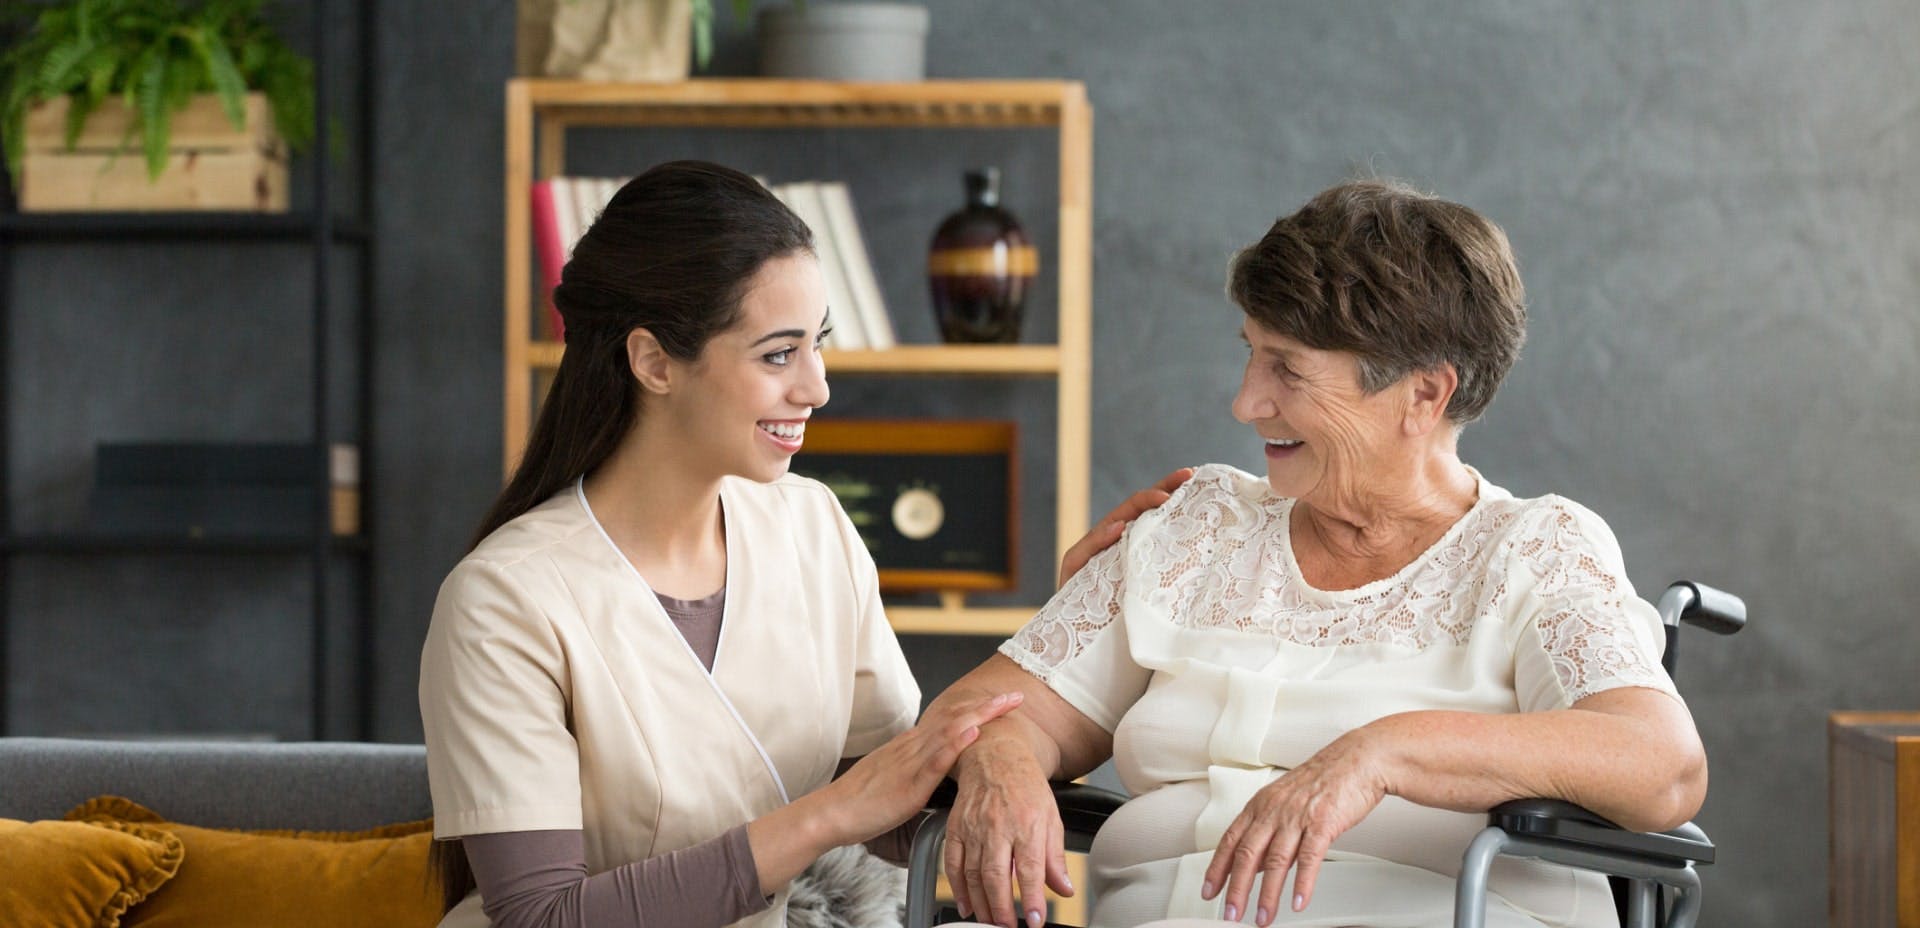 Home care vs nursing homes: Which one is better for your loved one?